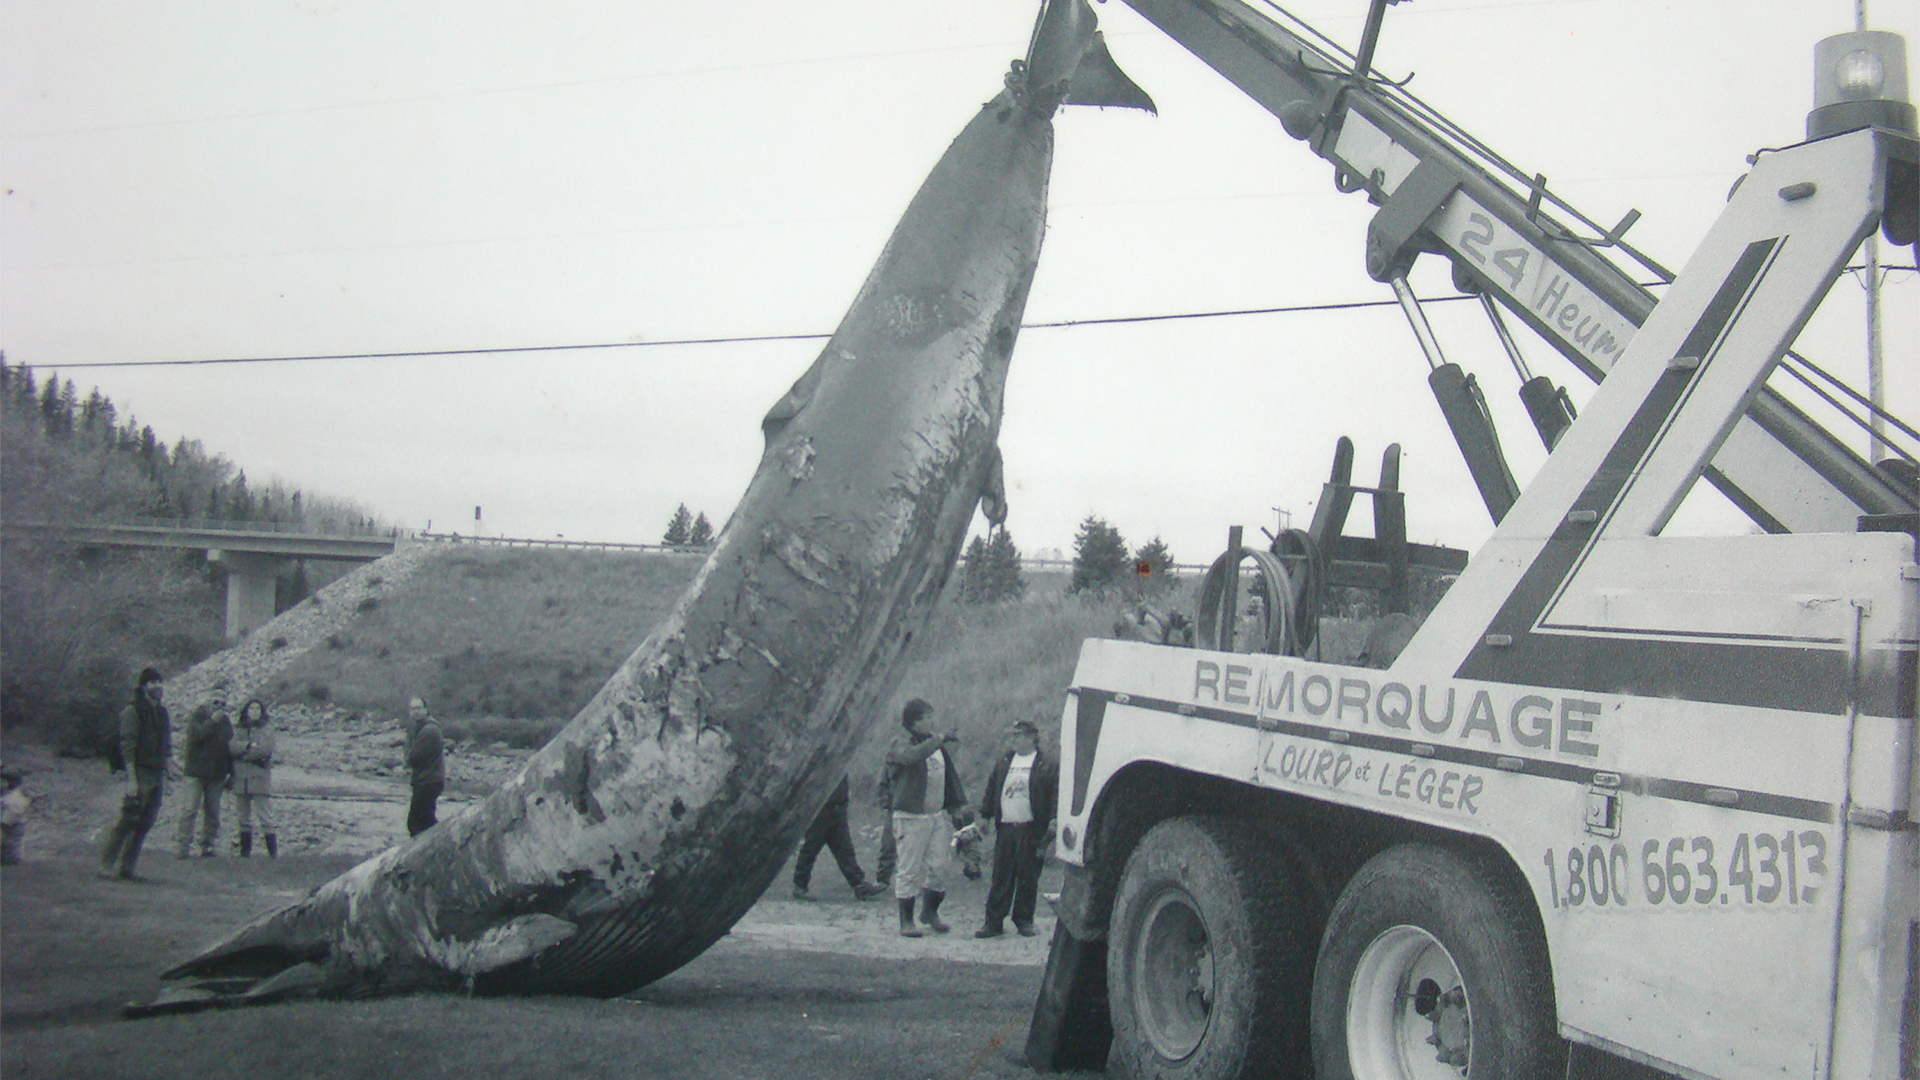 A crane lifts the minke whale carcass by the tail.